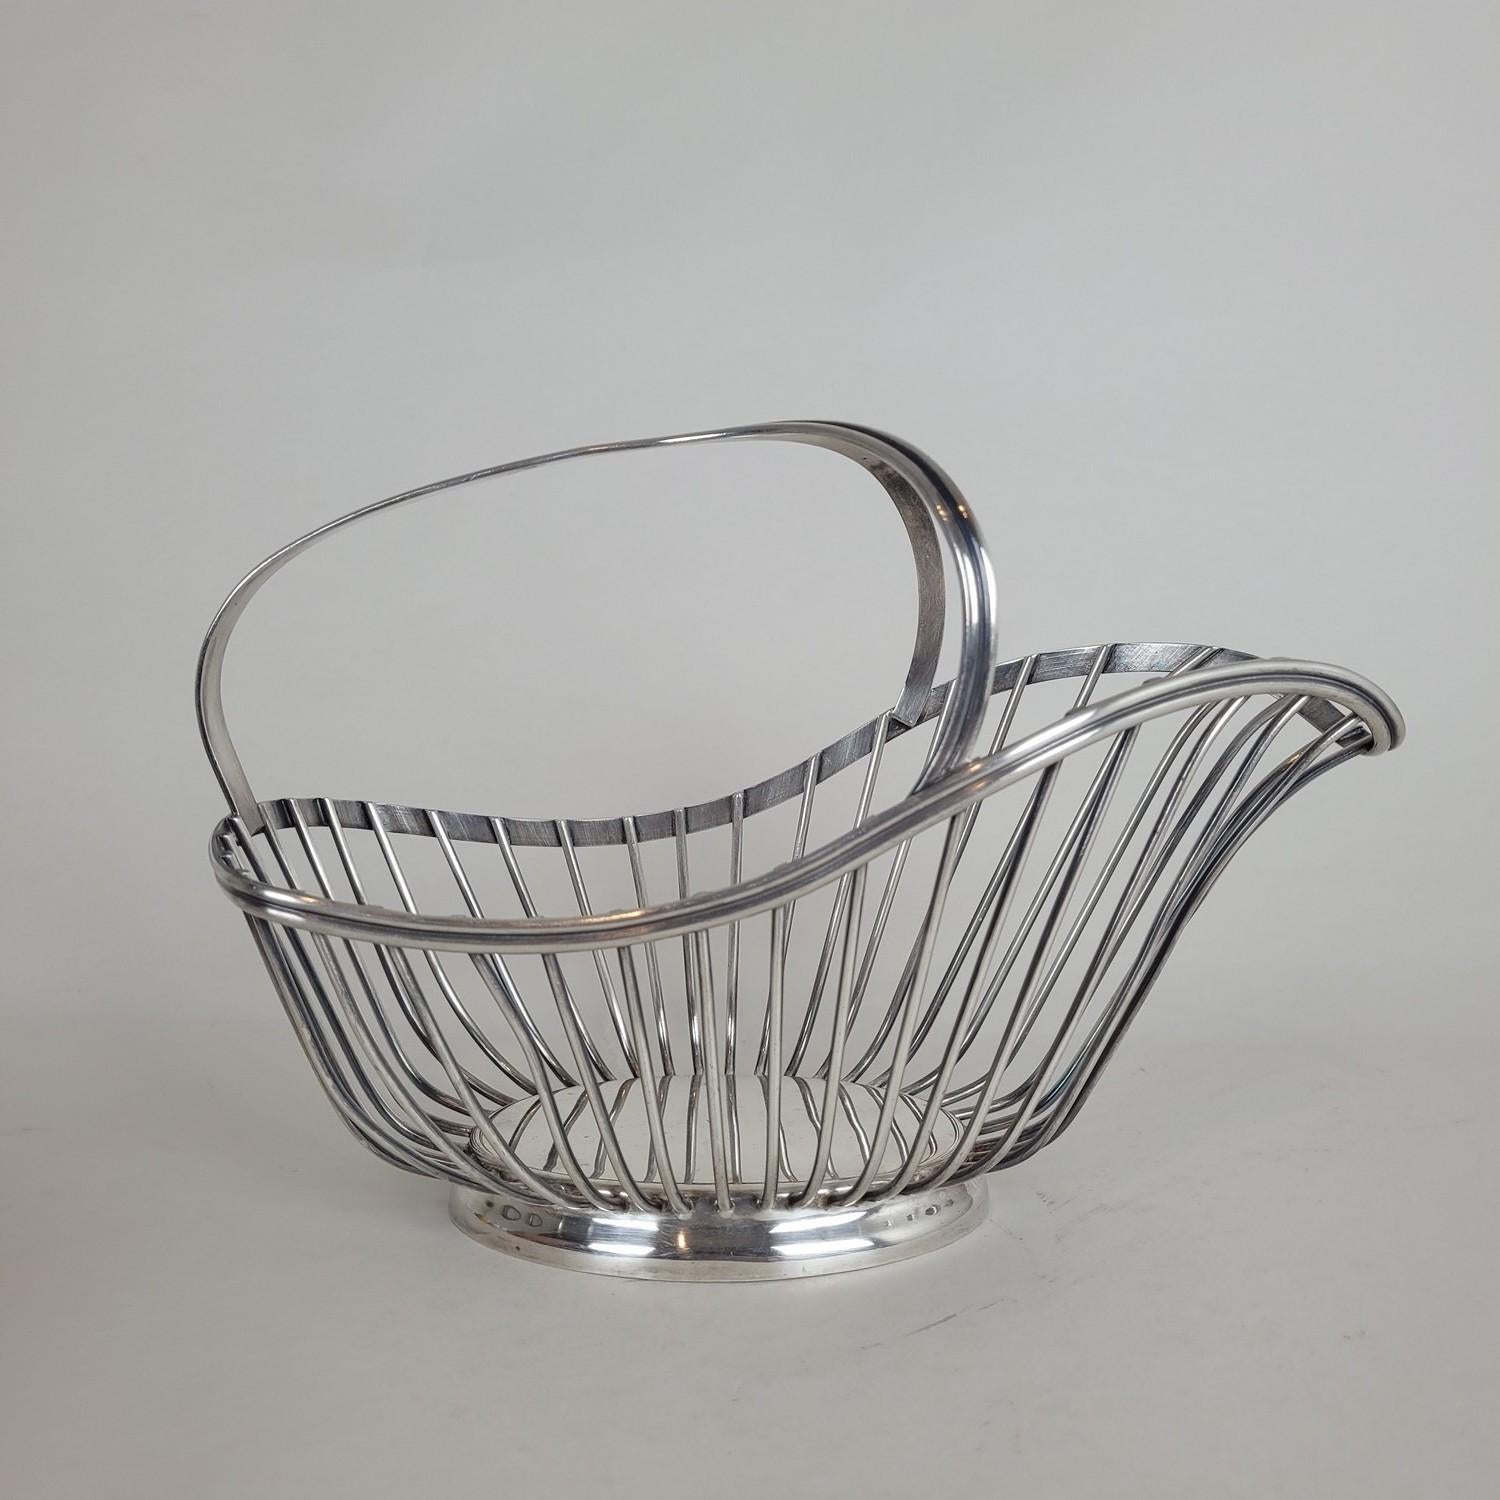 French Gallia / Christofle, Silver Plated Bottle Holder, 20th Century